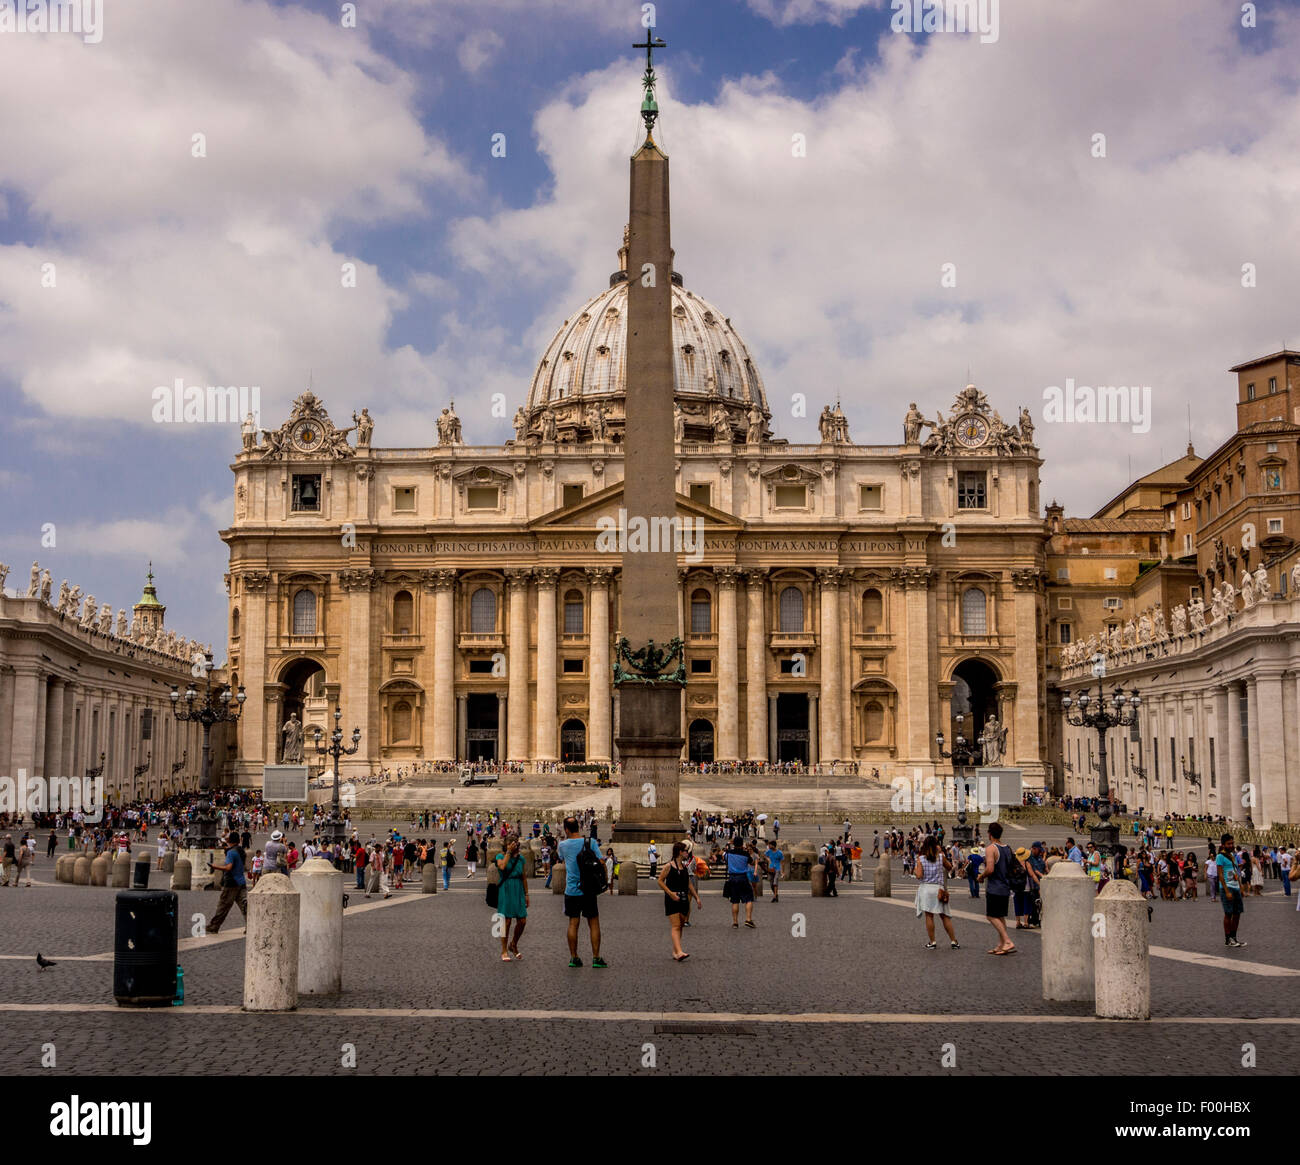 St Peter's basilica, St Peters Square. Vatican City, Rome. Italy. Stock Photo